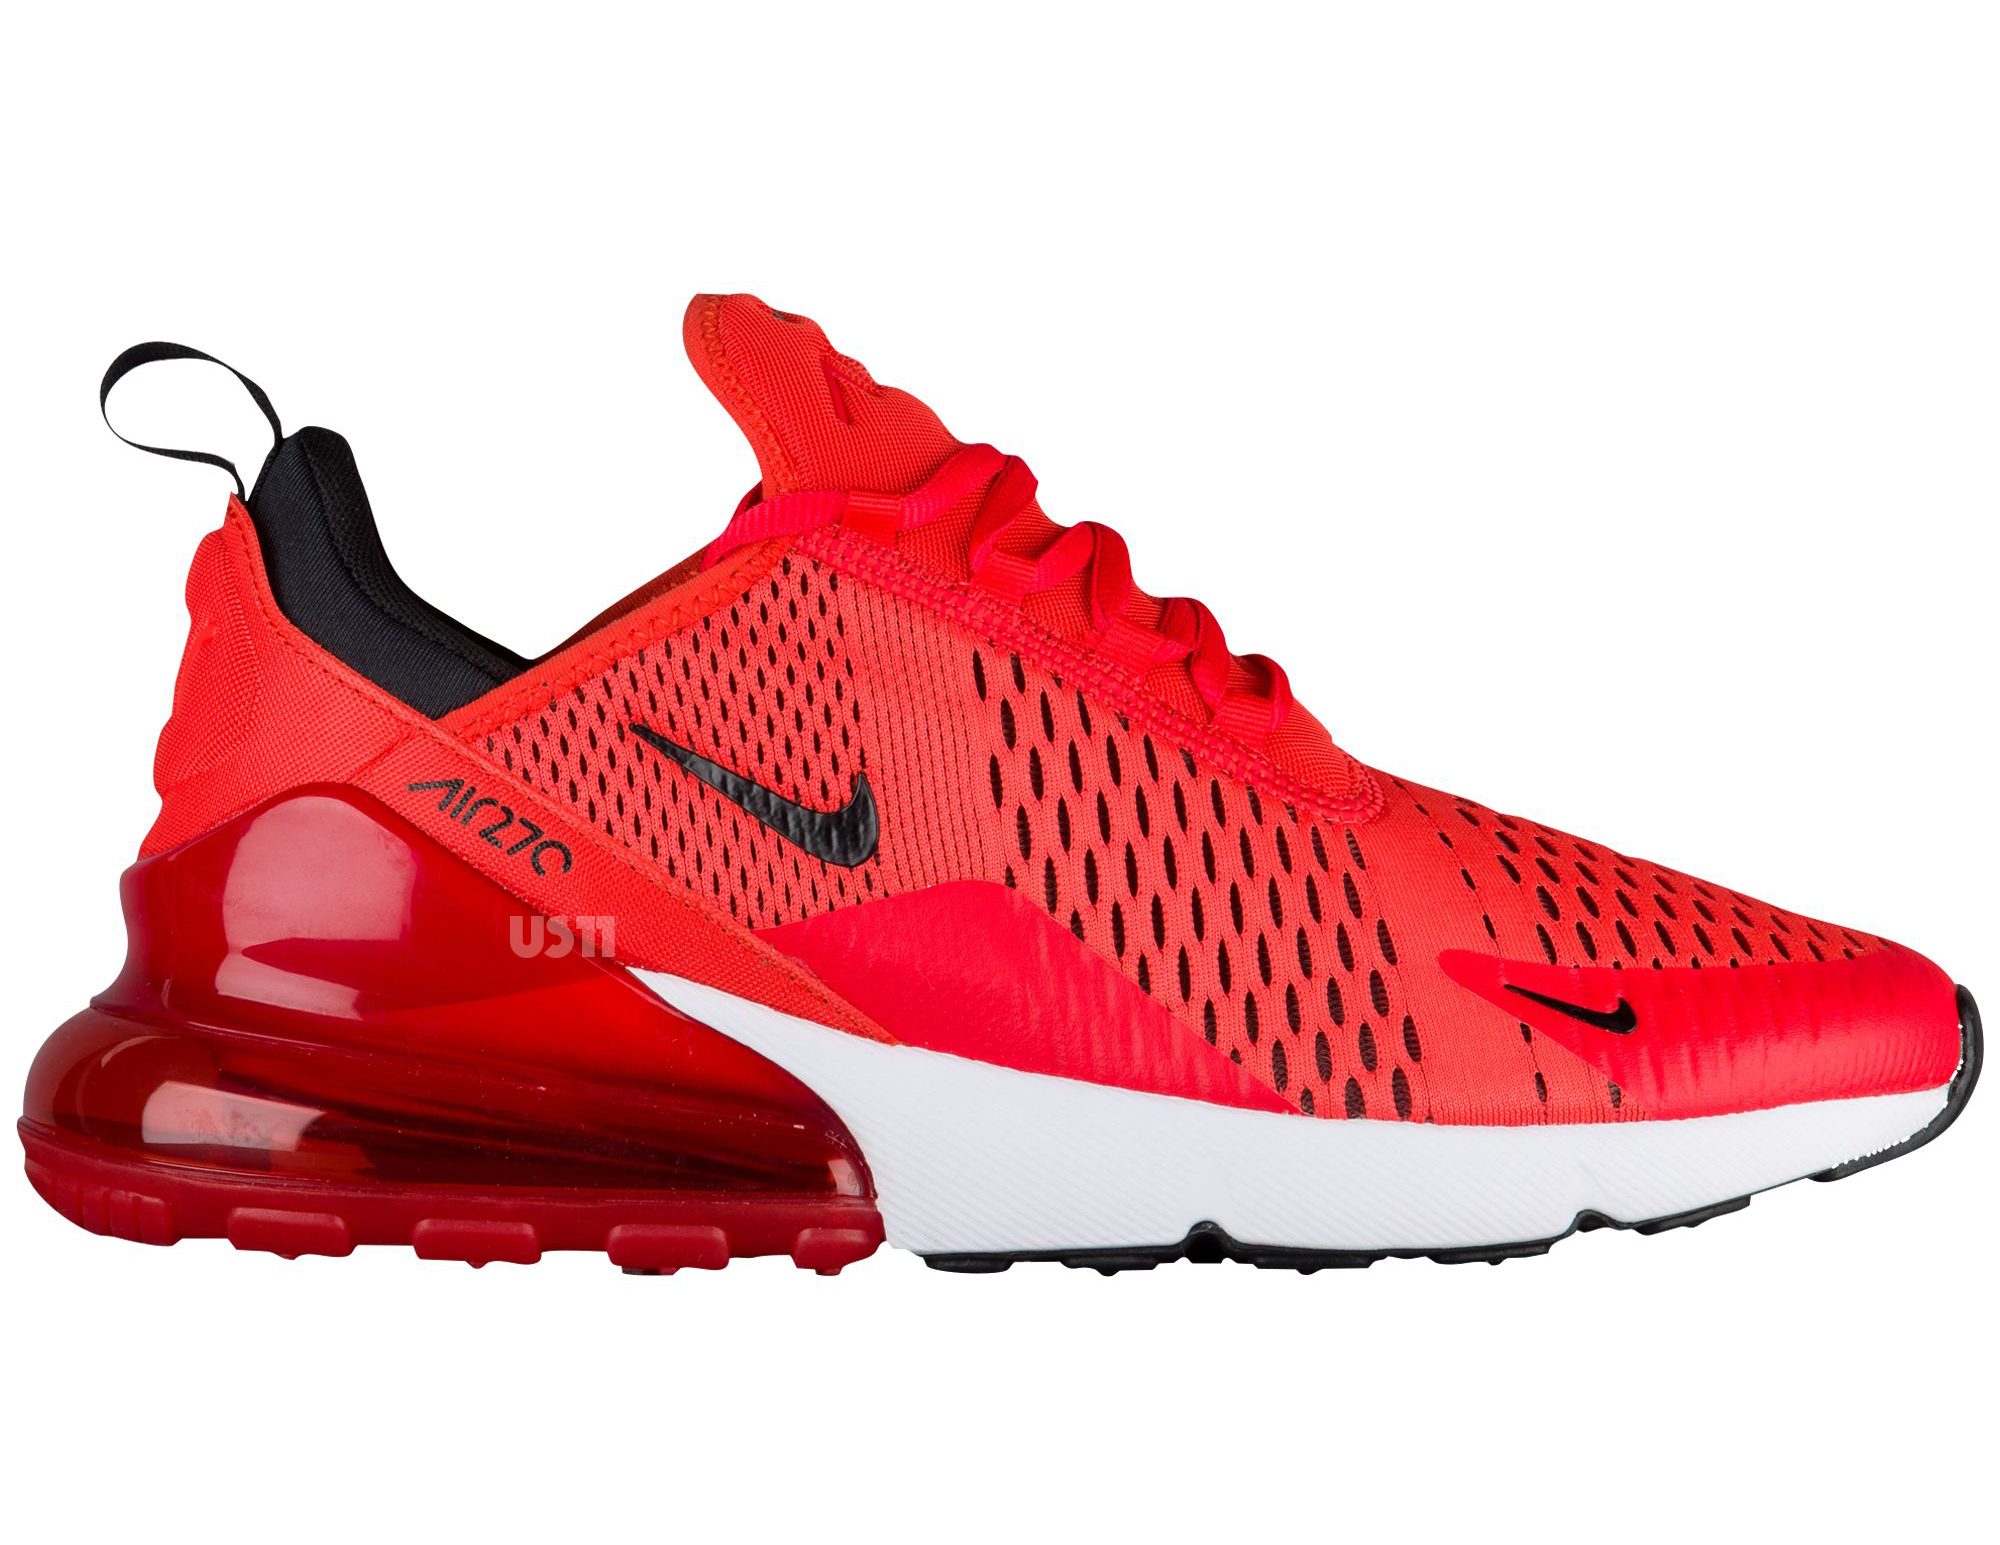 Humanista un acreedor bofetada Here's a Detailed Look at Several Nike Air Max 270 Colorways - WearTesters